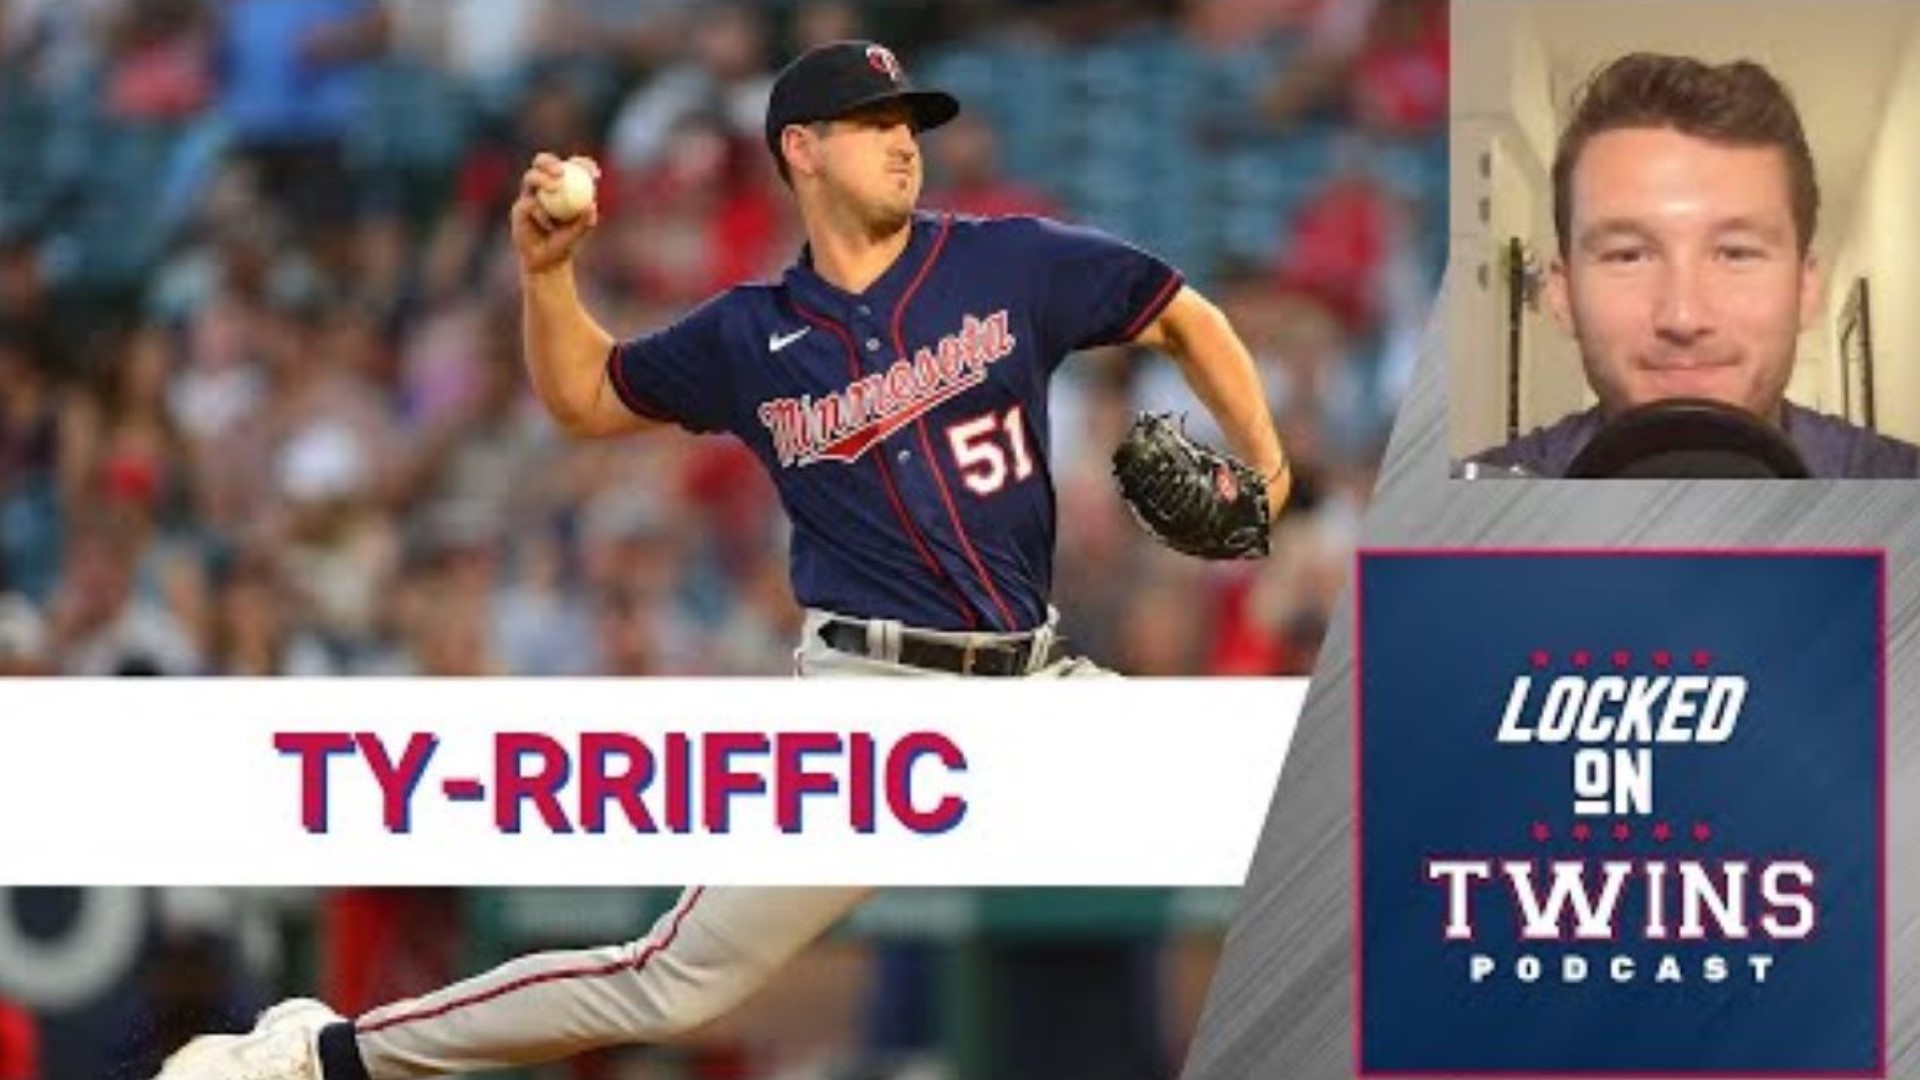 Tyler Mahle was absolutely terrific in Friday's Twins win over the Los Angeles Angels in Anaheim. Mahle spun six scoreless innings, striking out six.